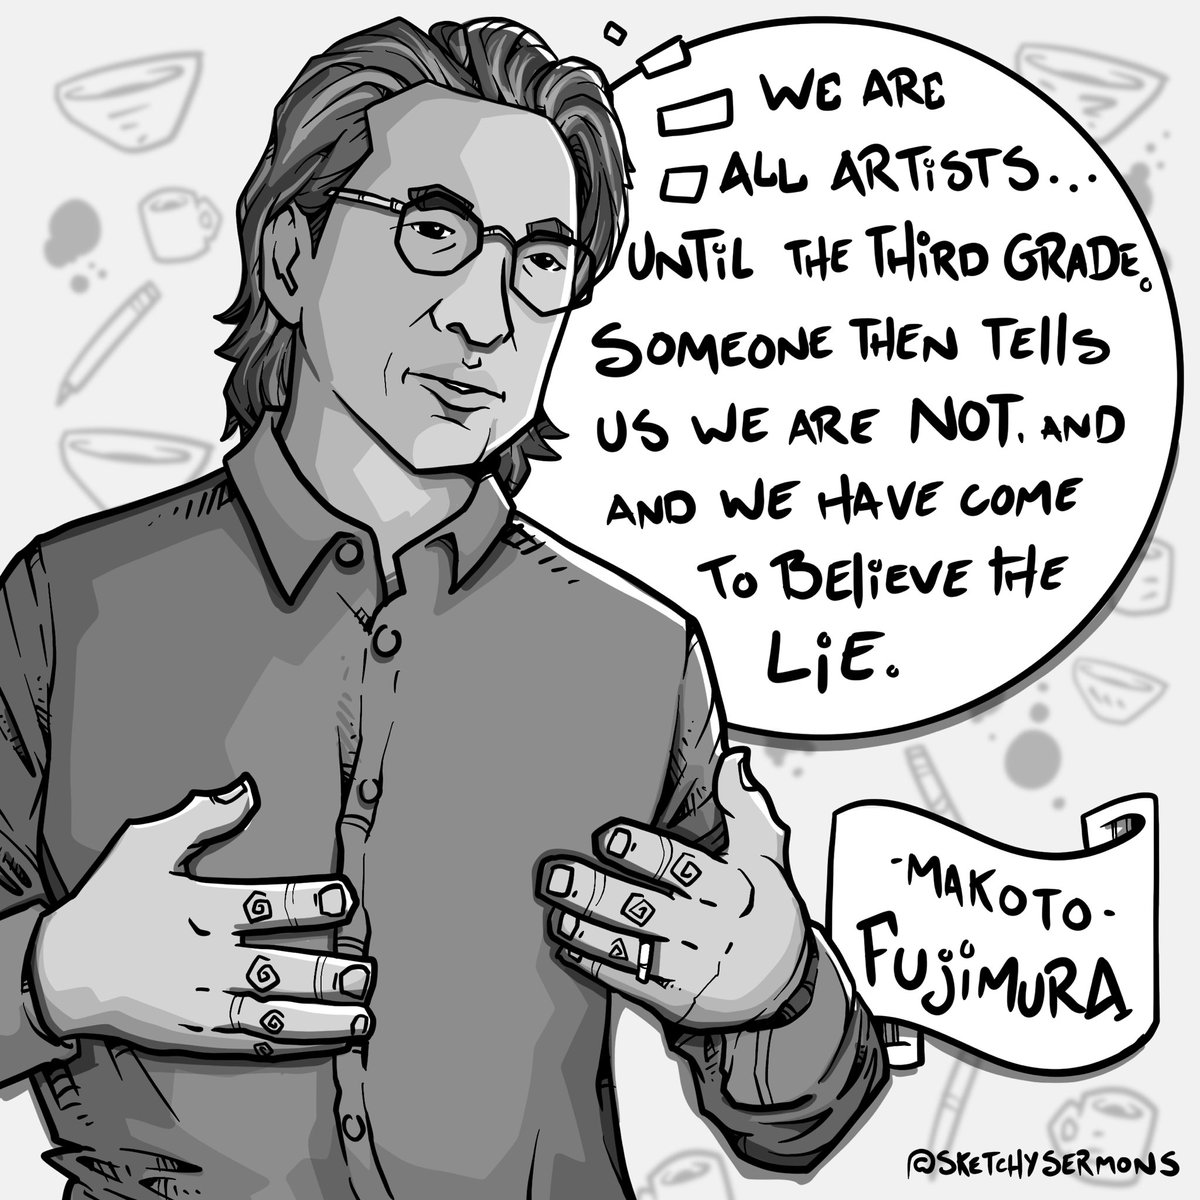 We are all artists…until the third grade. Someone then tells us that we are not, and have we come to believe the lie. @iamfujimura